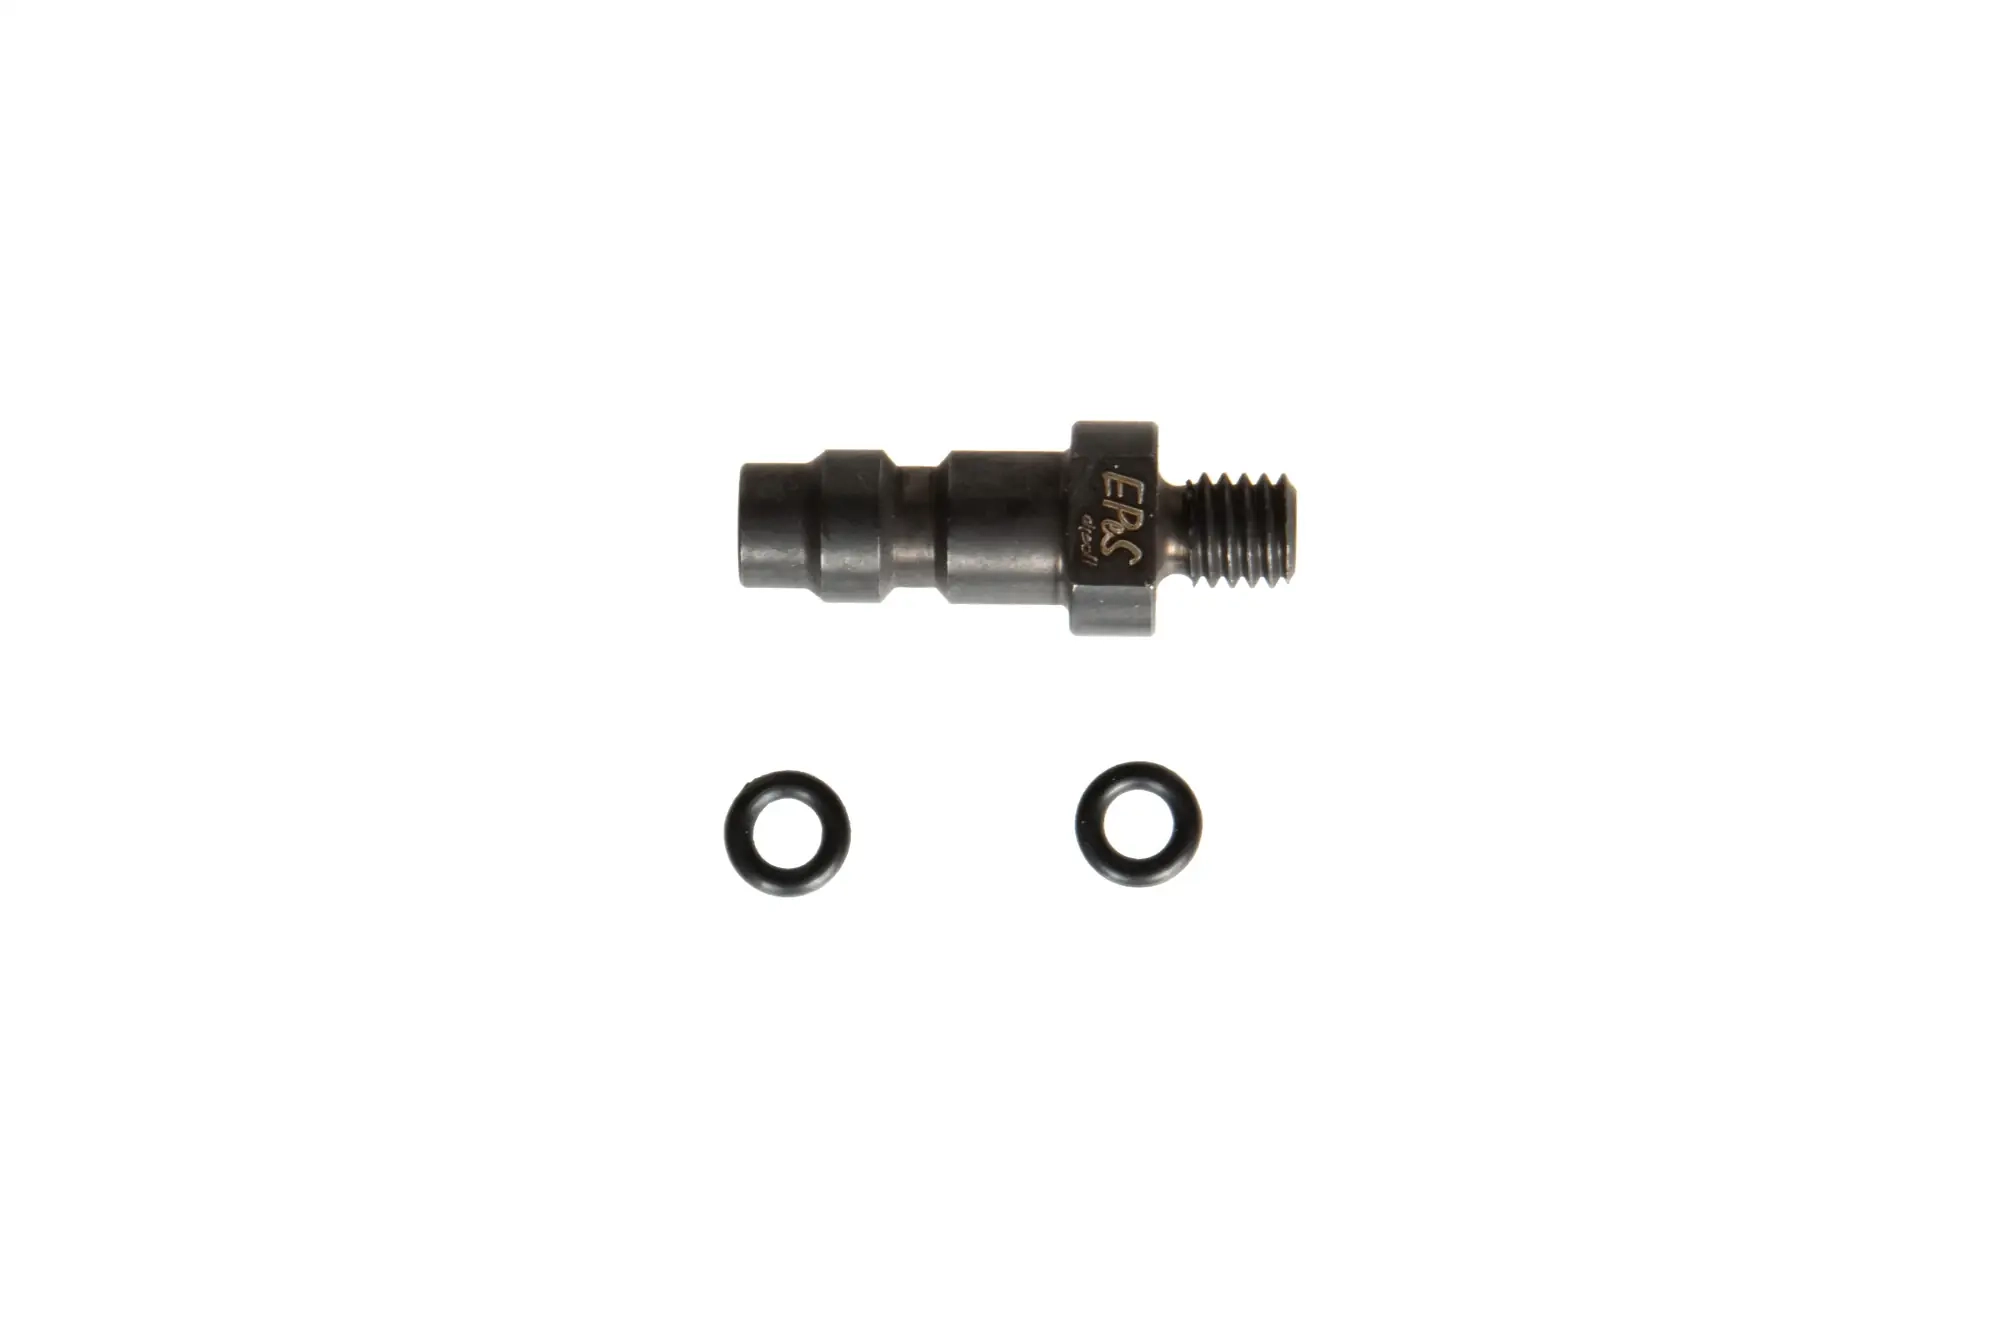 EPeS Airsoft HPA adaptor - type M6/DE